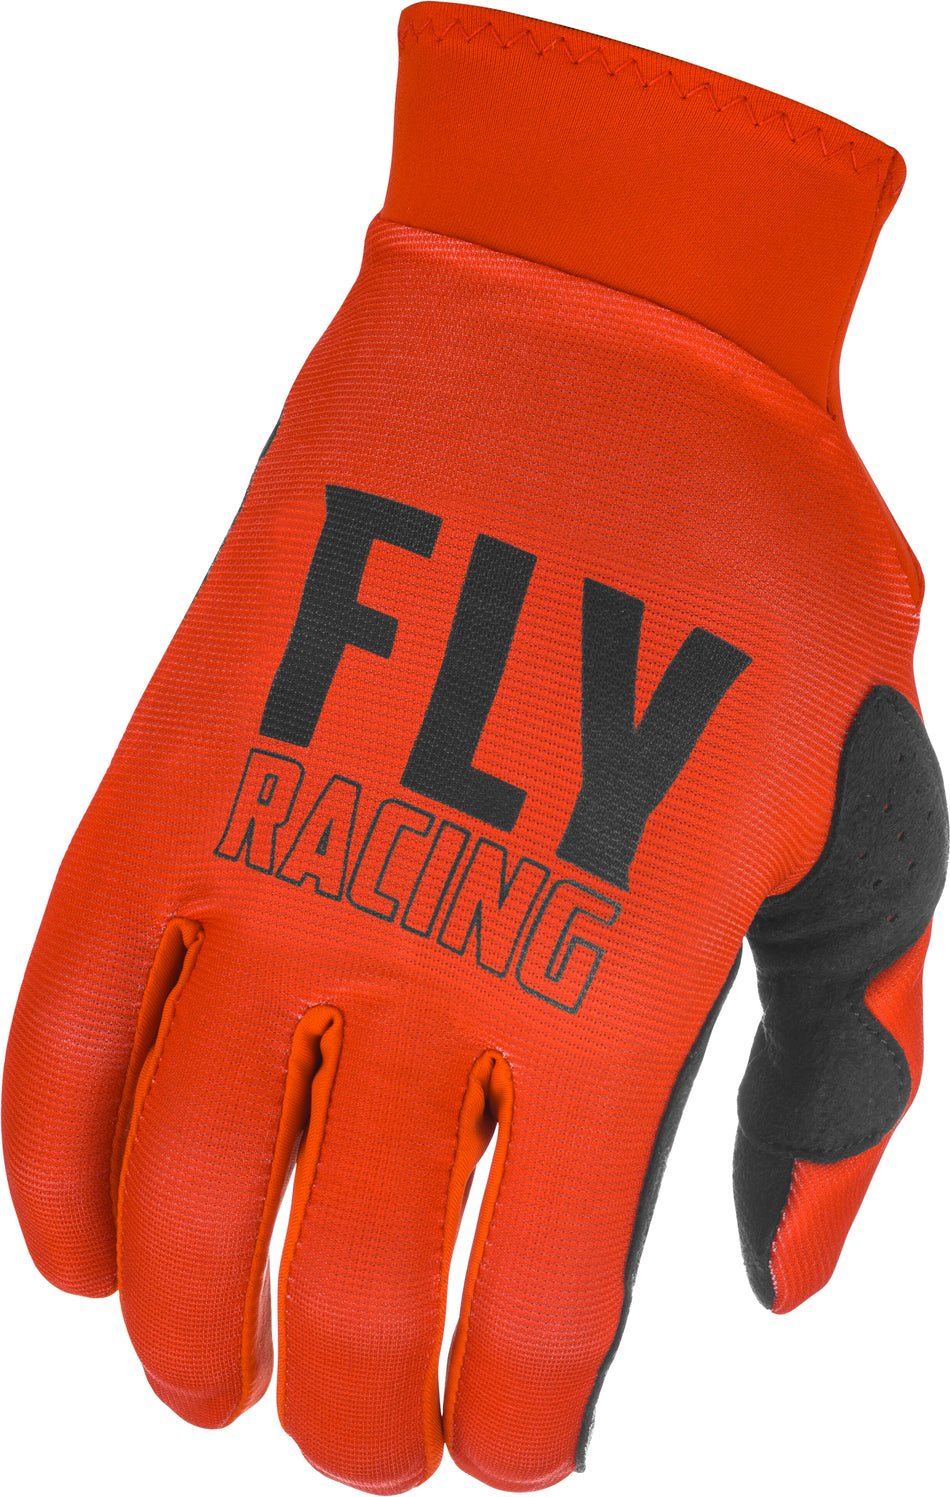 FLY RACING Pro Lite Gloves Red/Black Sz 08 374-85208